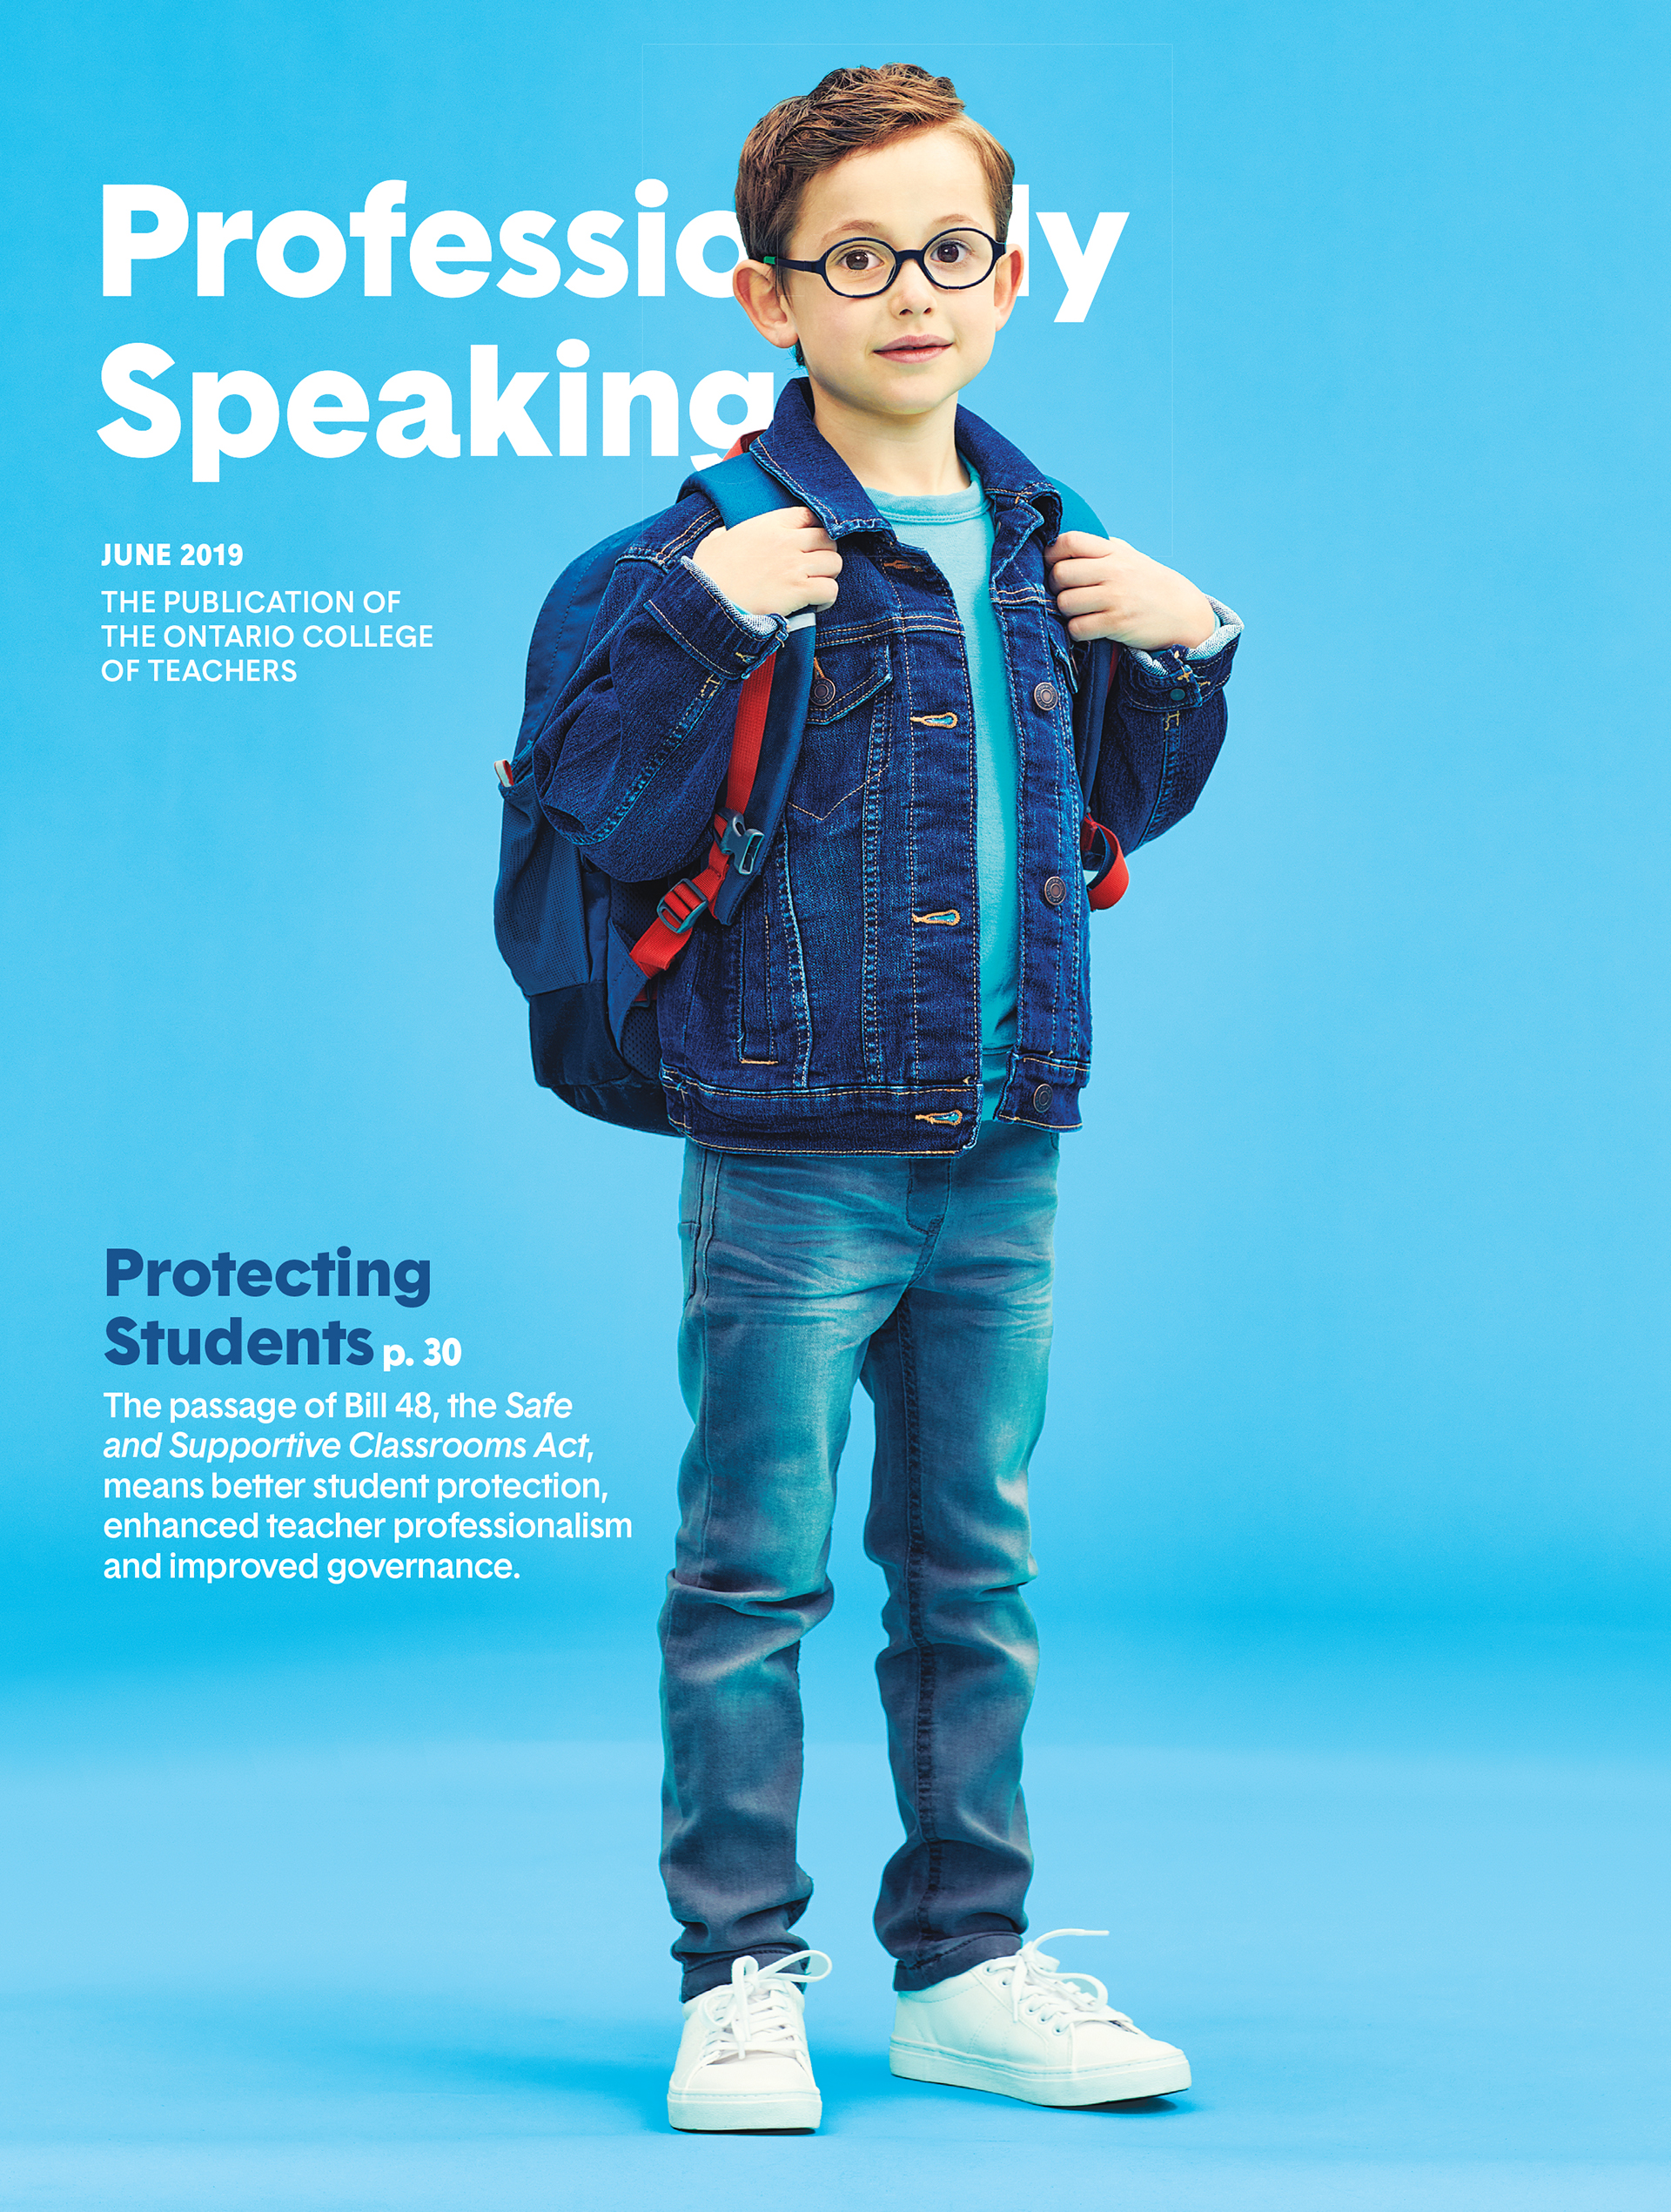 Cover of the June 2019 issue of 'Professionally Speaking' featuring a child with glasses wearing a backpack. The child is standing with both hands on the straps of the backpack.